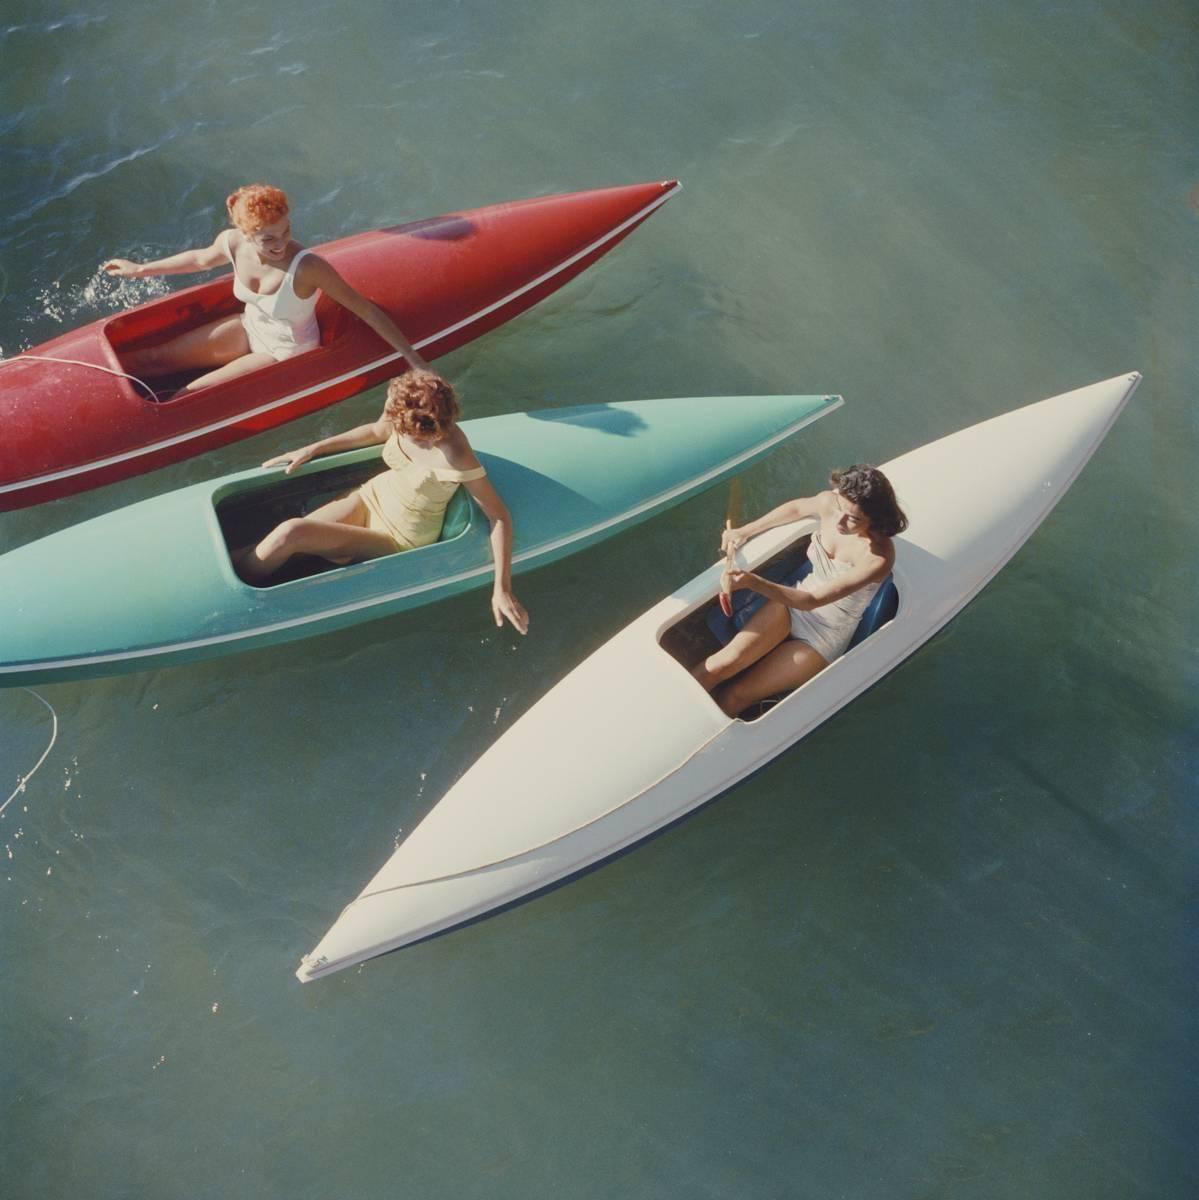 1959: Young women canoeing on the Nevada side of Lake Tahoe, a large freshwater lake in the Sierra Nevada Mountains, straddling the border of California and Nevada. Three young woman are pictured in their red, turquoise and white canoes in the